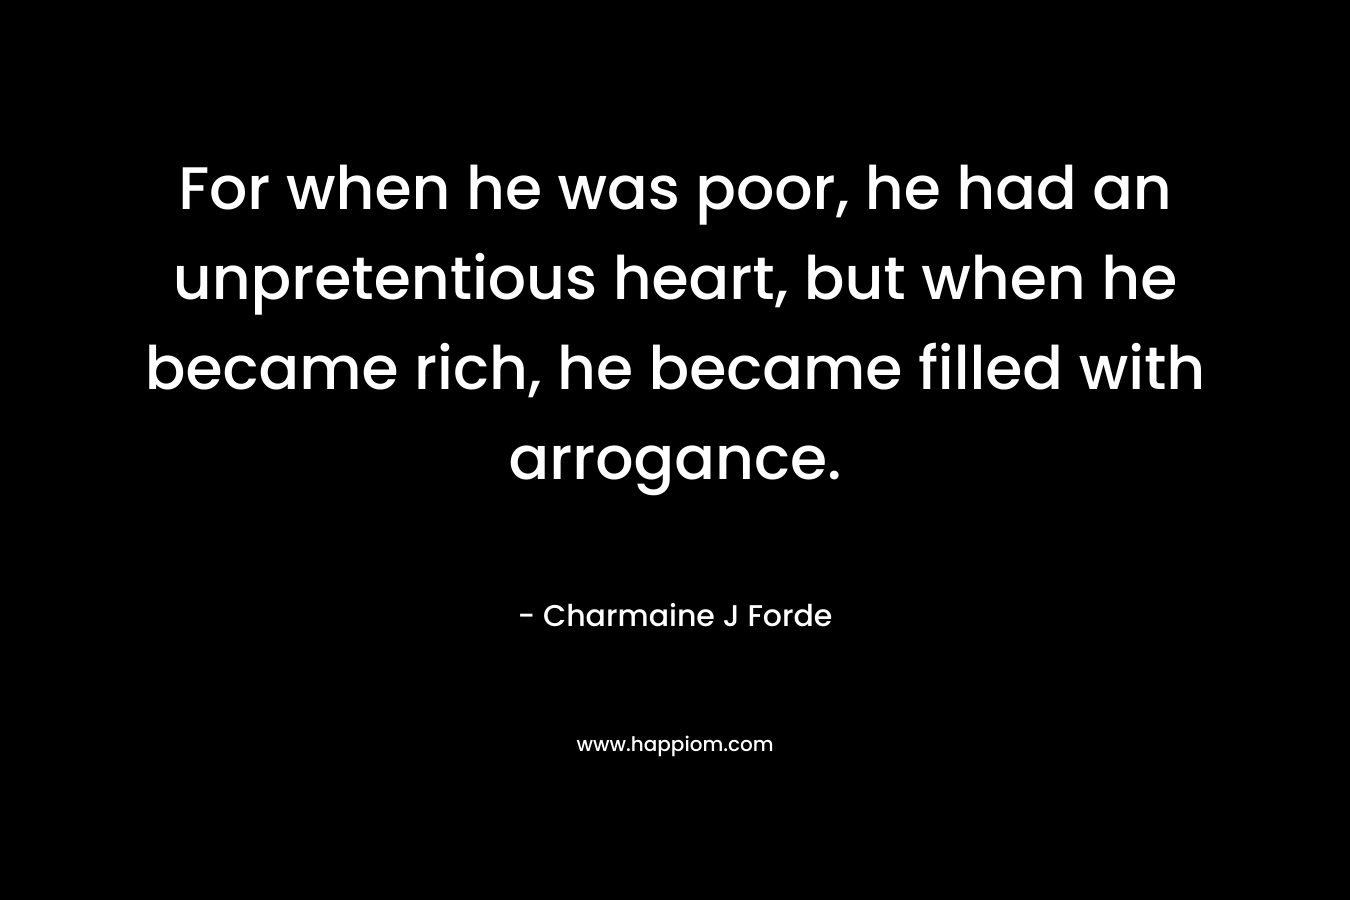 For when he was poor, he had an unpretentious heart, but when he became rich, he became filled with arrogance.